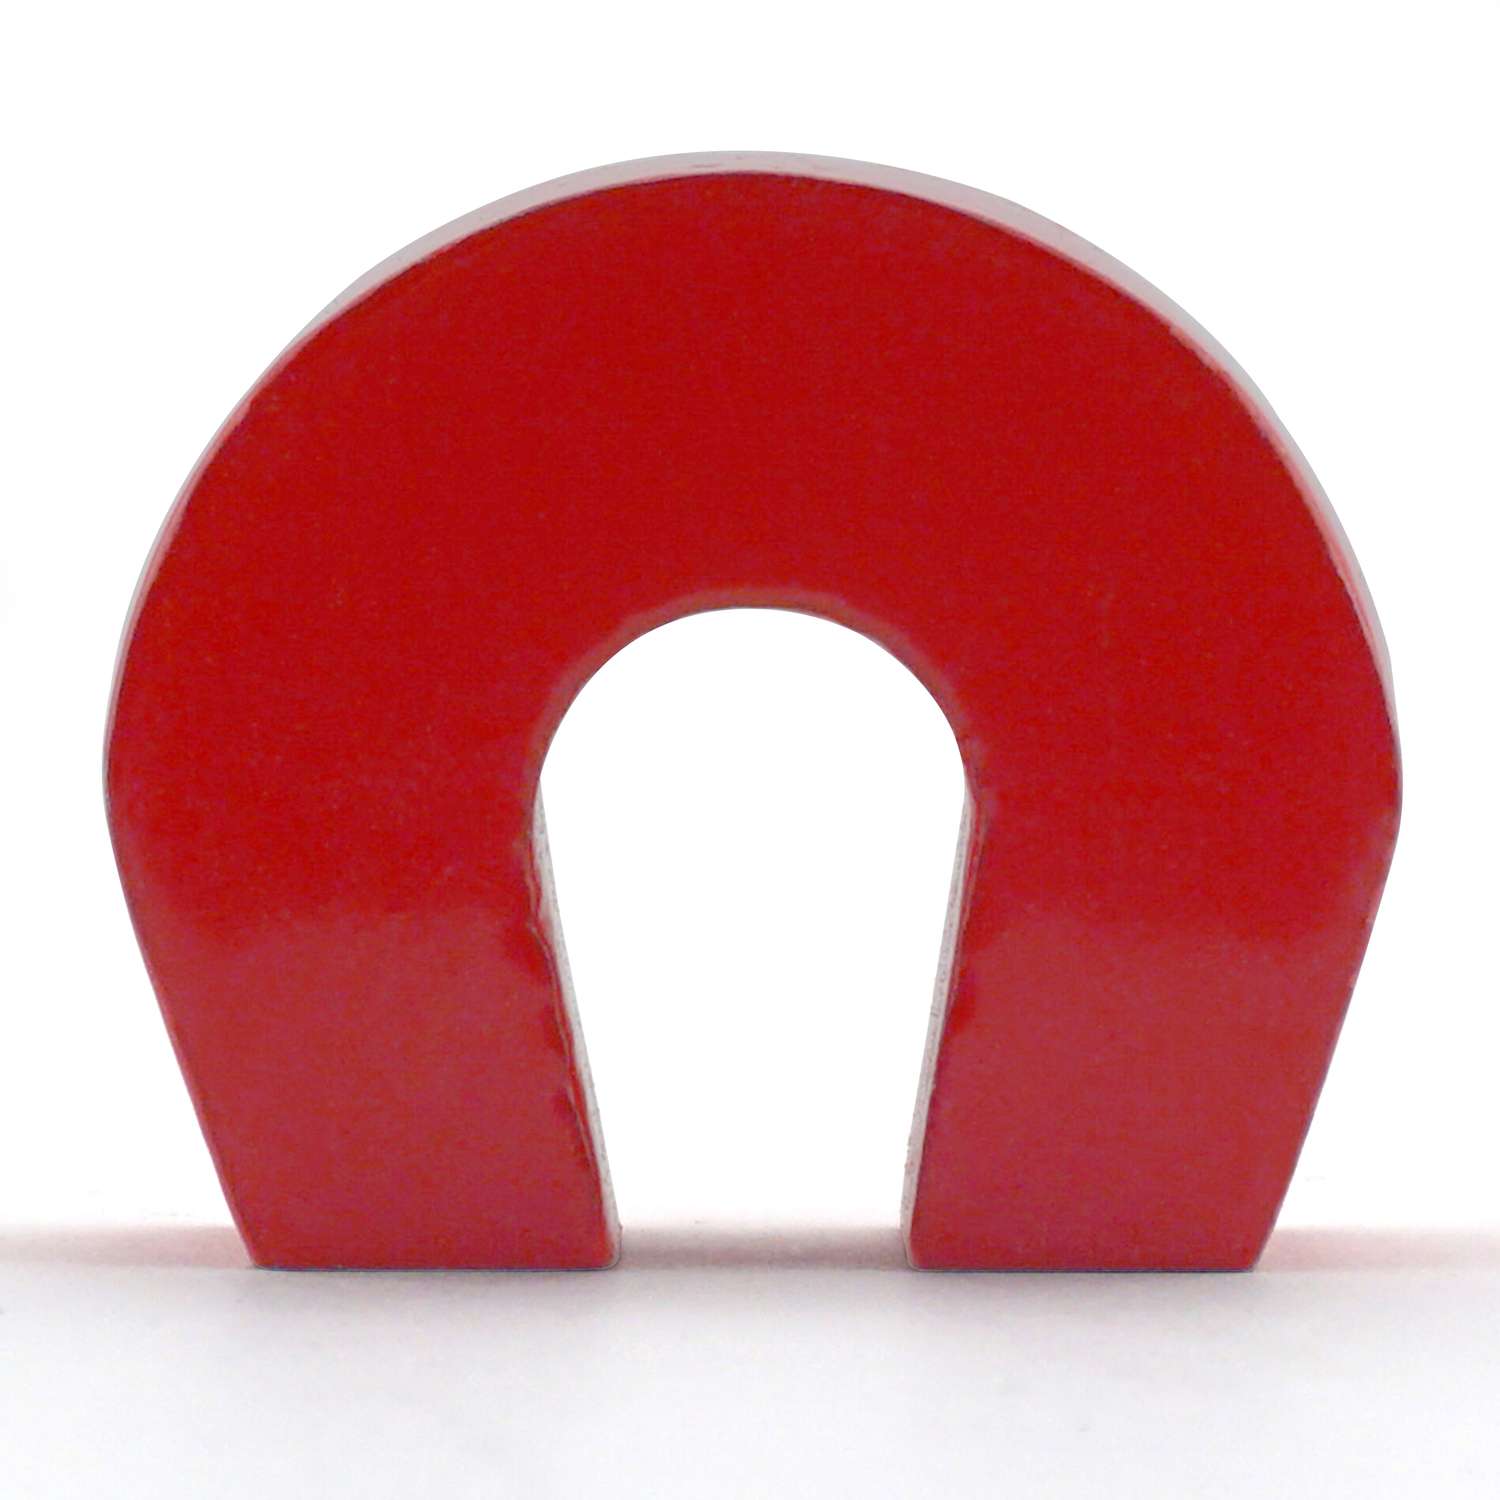 Magnet Source 1 L X 1.126 in. W Red Horseshoe Magnet 2 lb. pull 1 pc